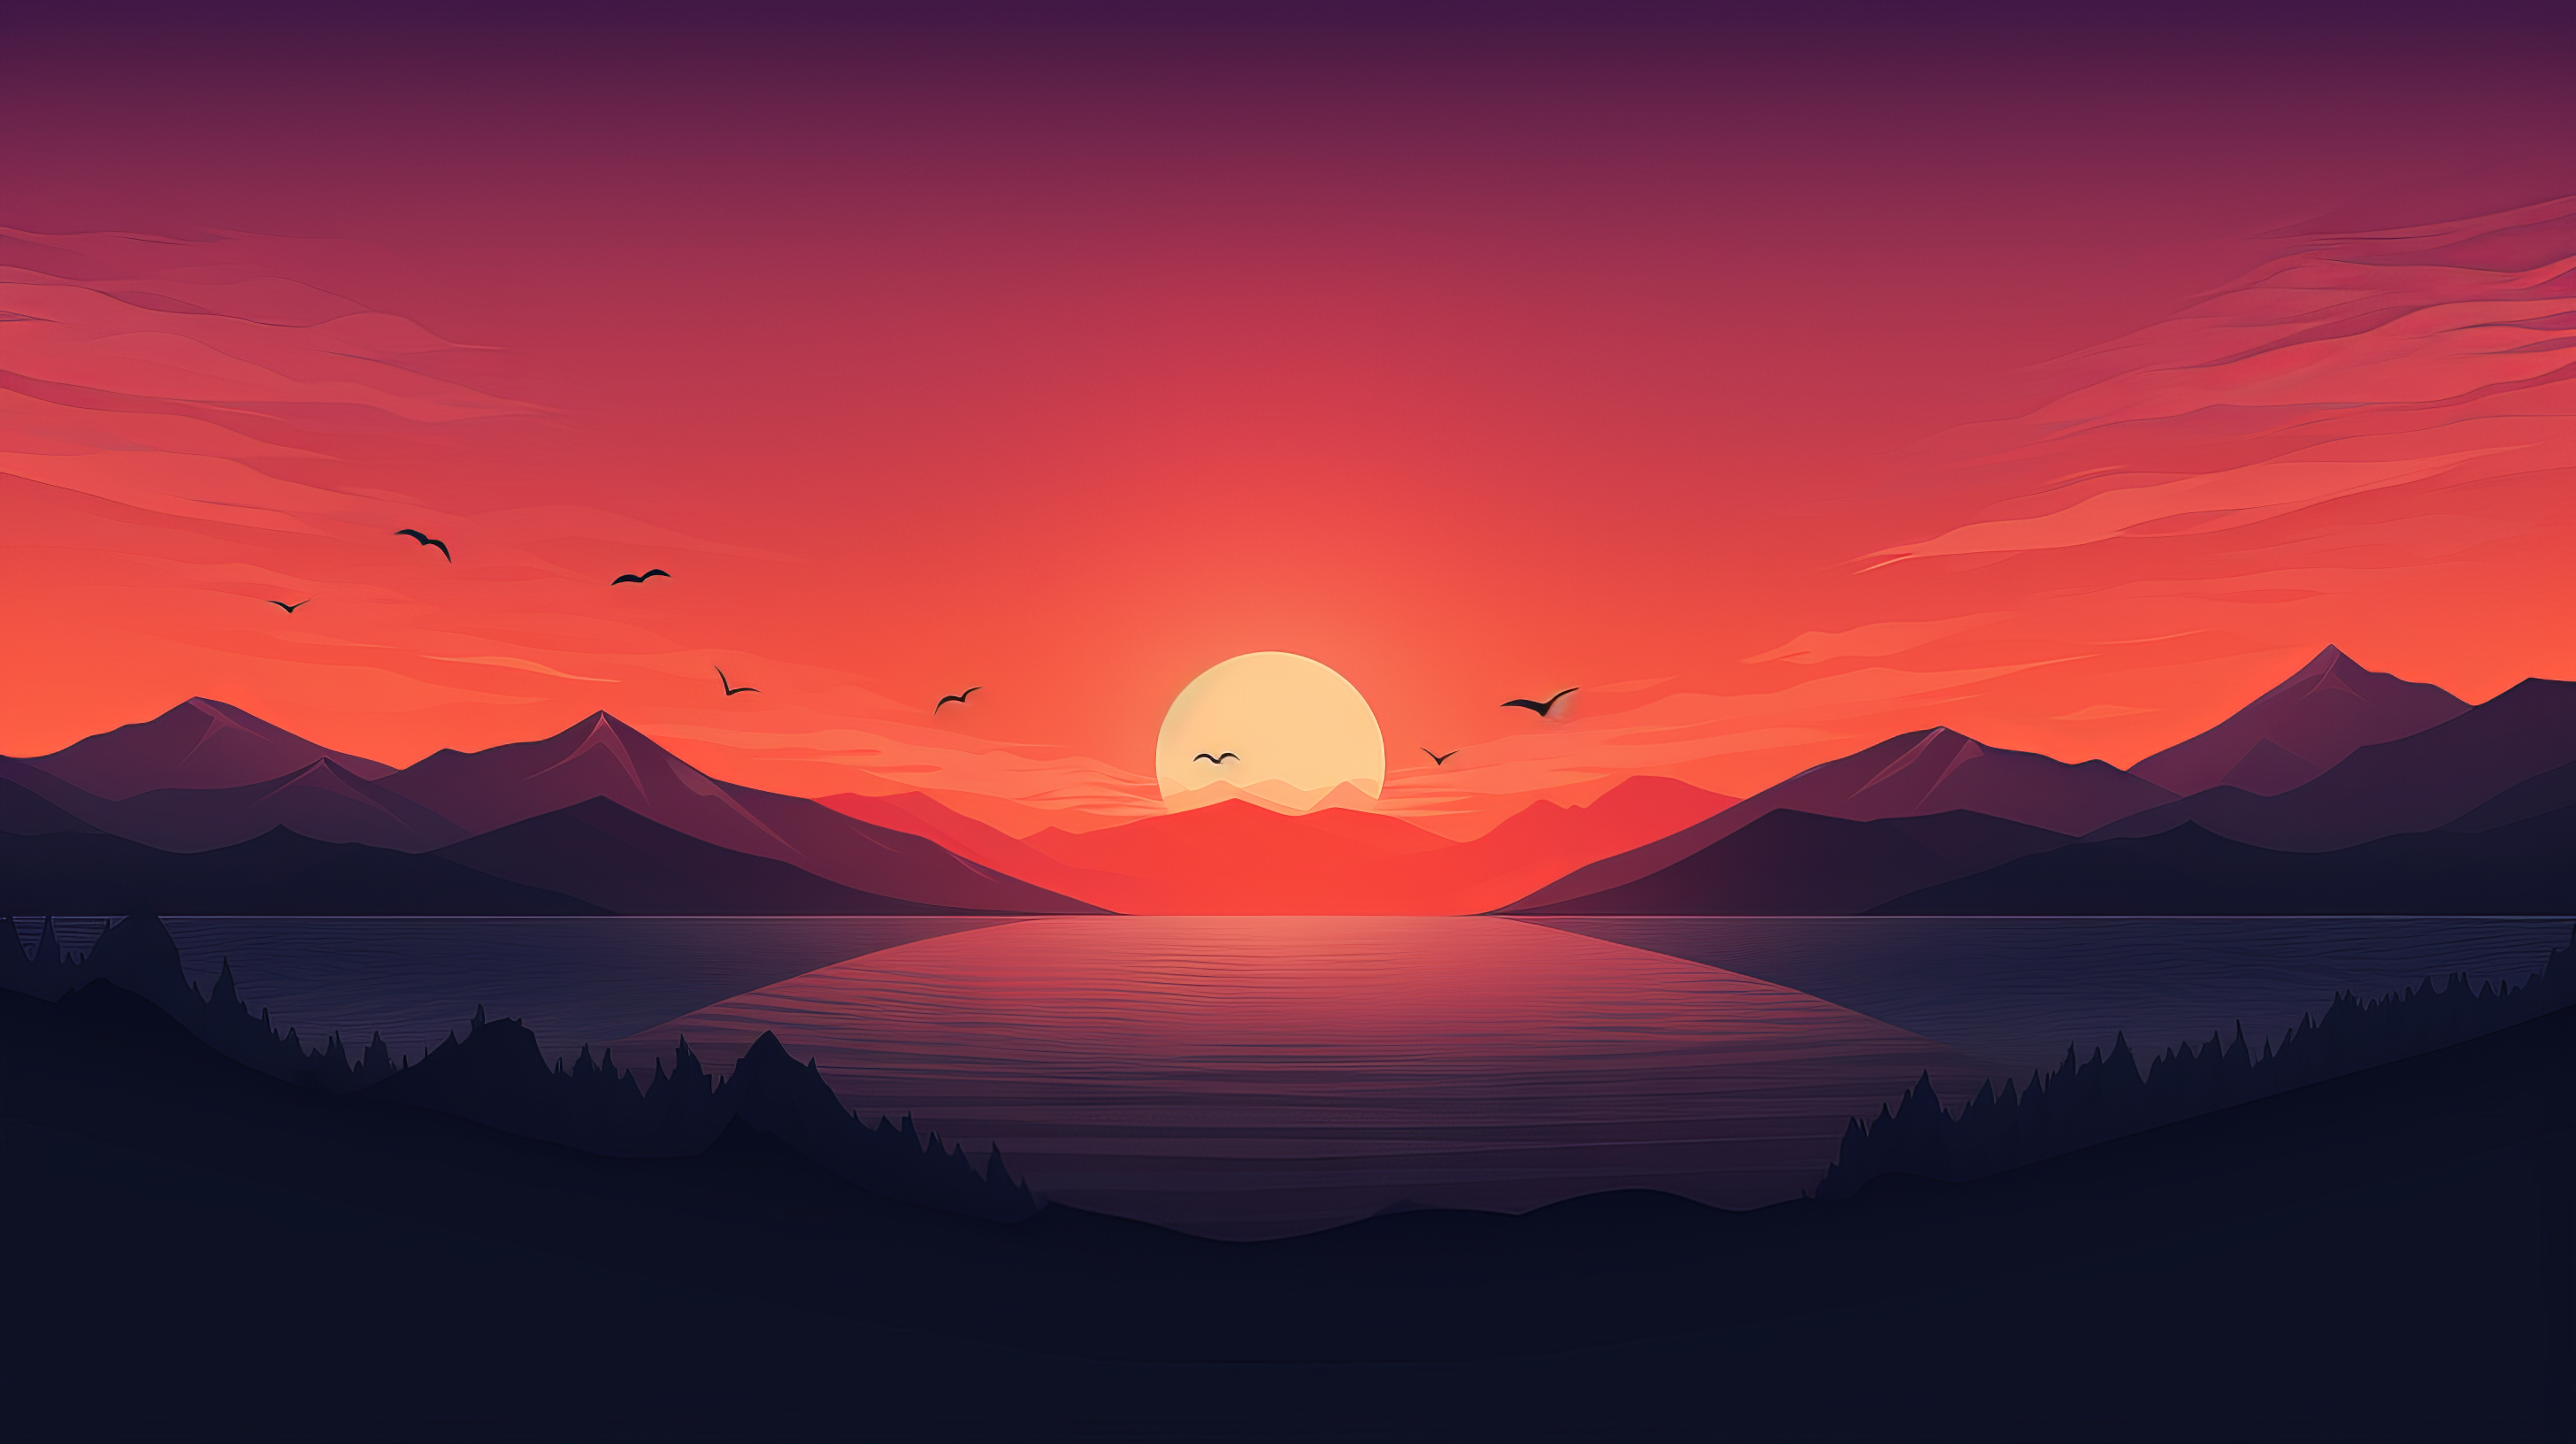 230+ Artistic Minimalist HD Wallpapers and Backgrounds